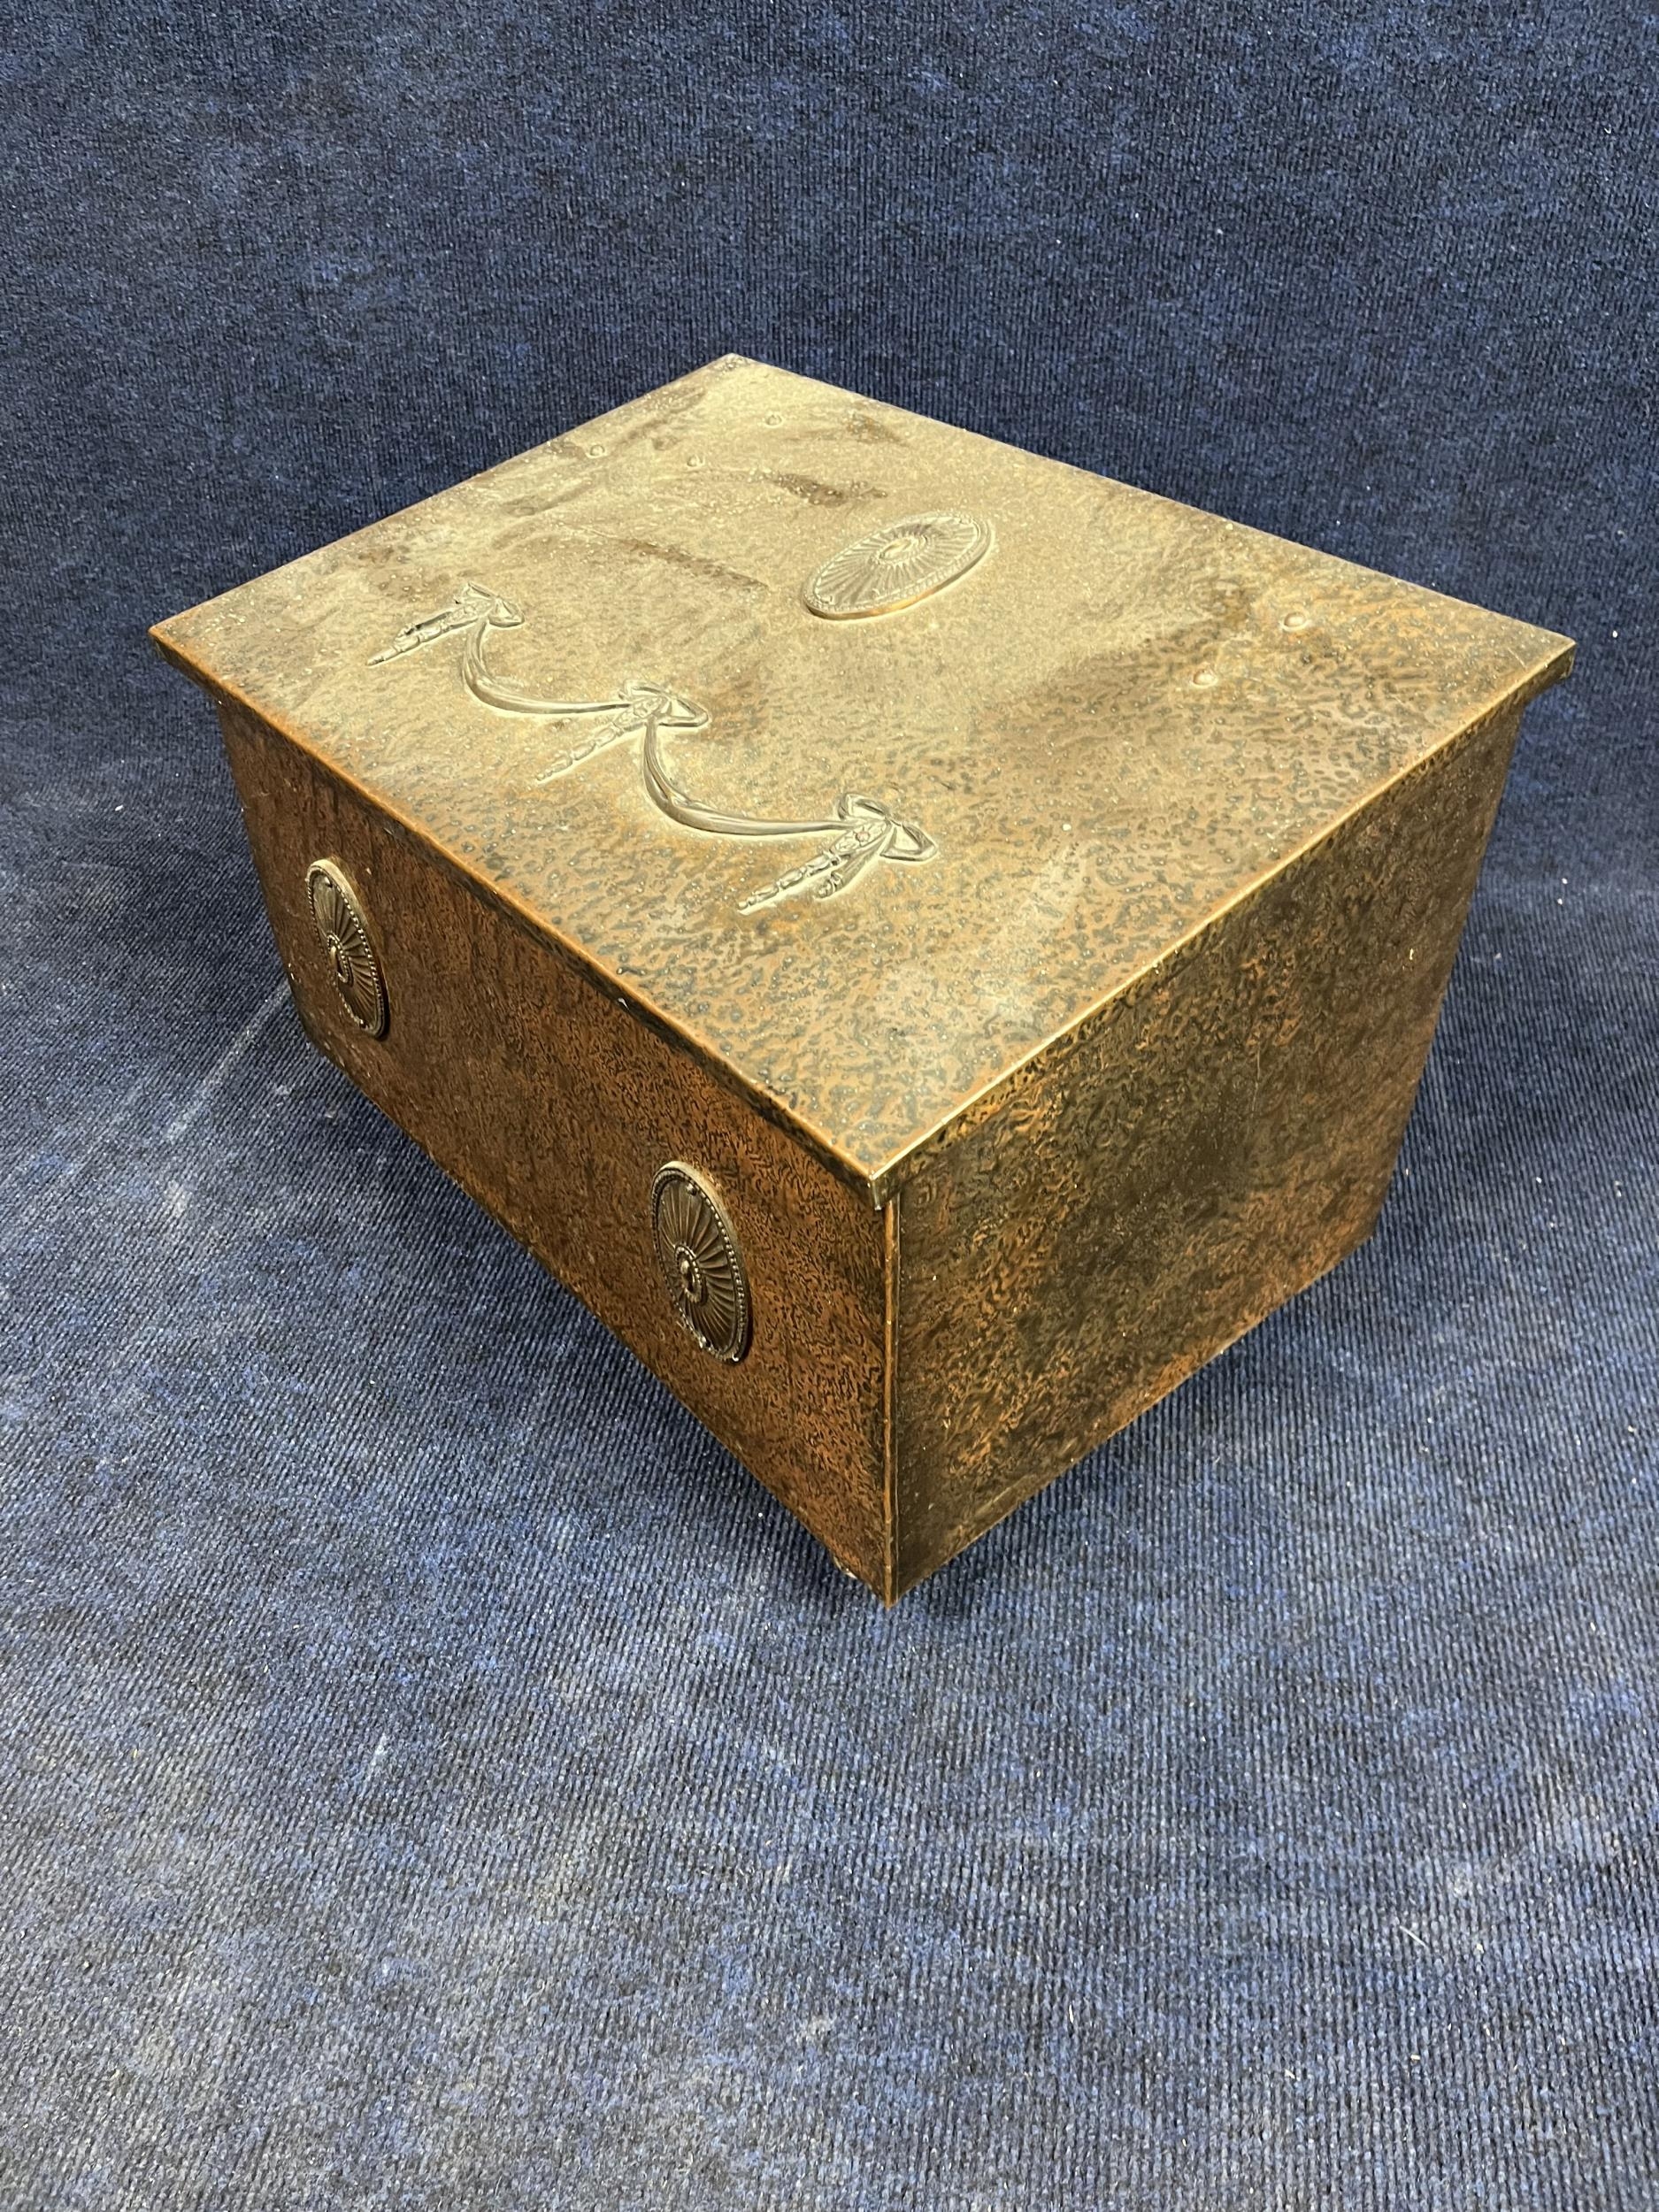 A C.1900 copper coal box, with neoclassical decoration - Image 5 of 5